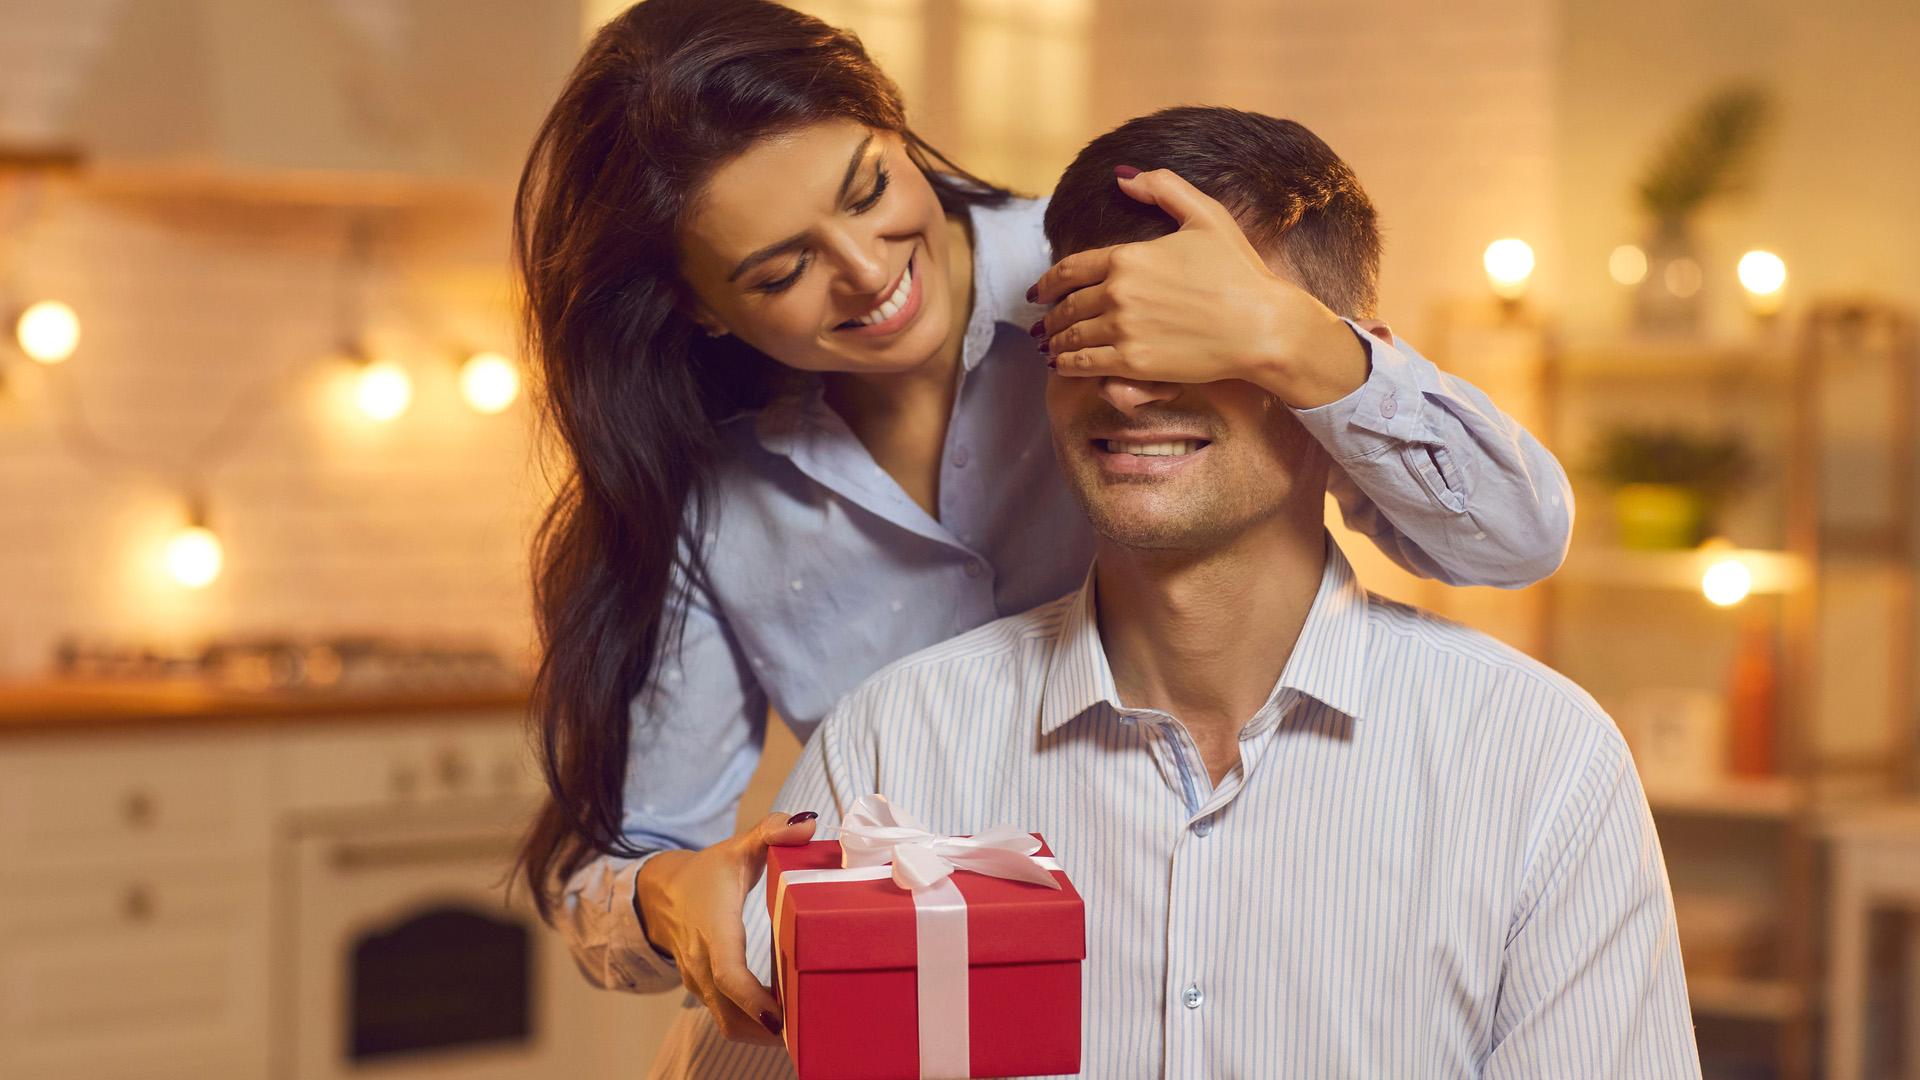 Brunette woman covering eyes of man with one hand and placing red gift box in front of him. Light bulbs in background.